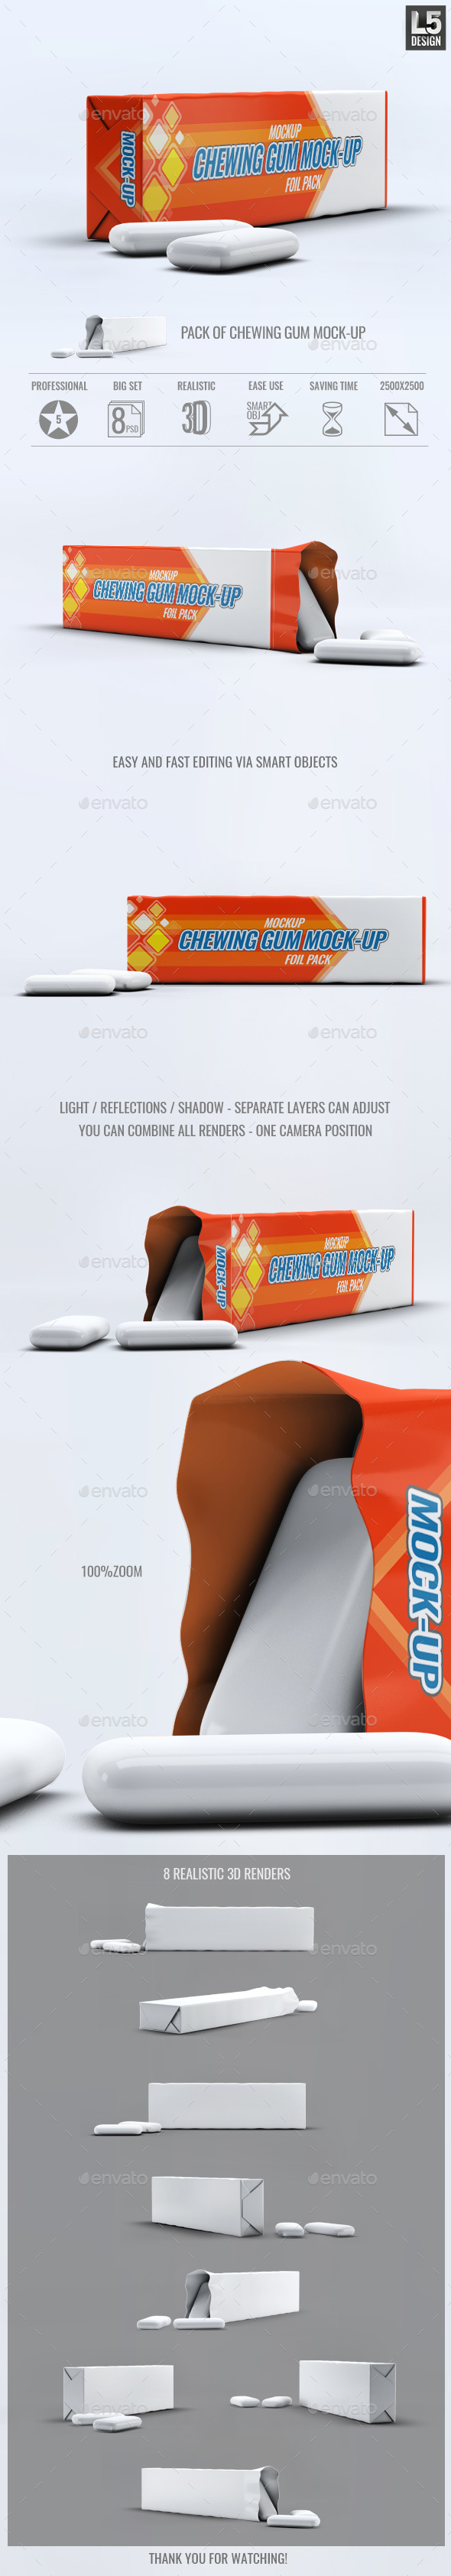 Chewing Gum Package Mock-Up